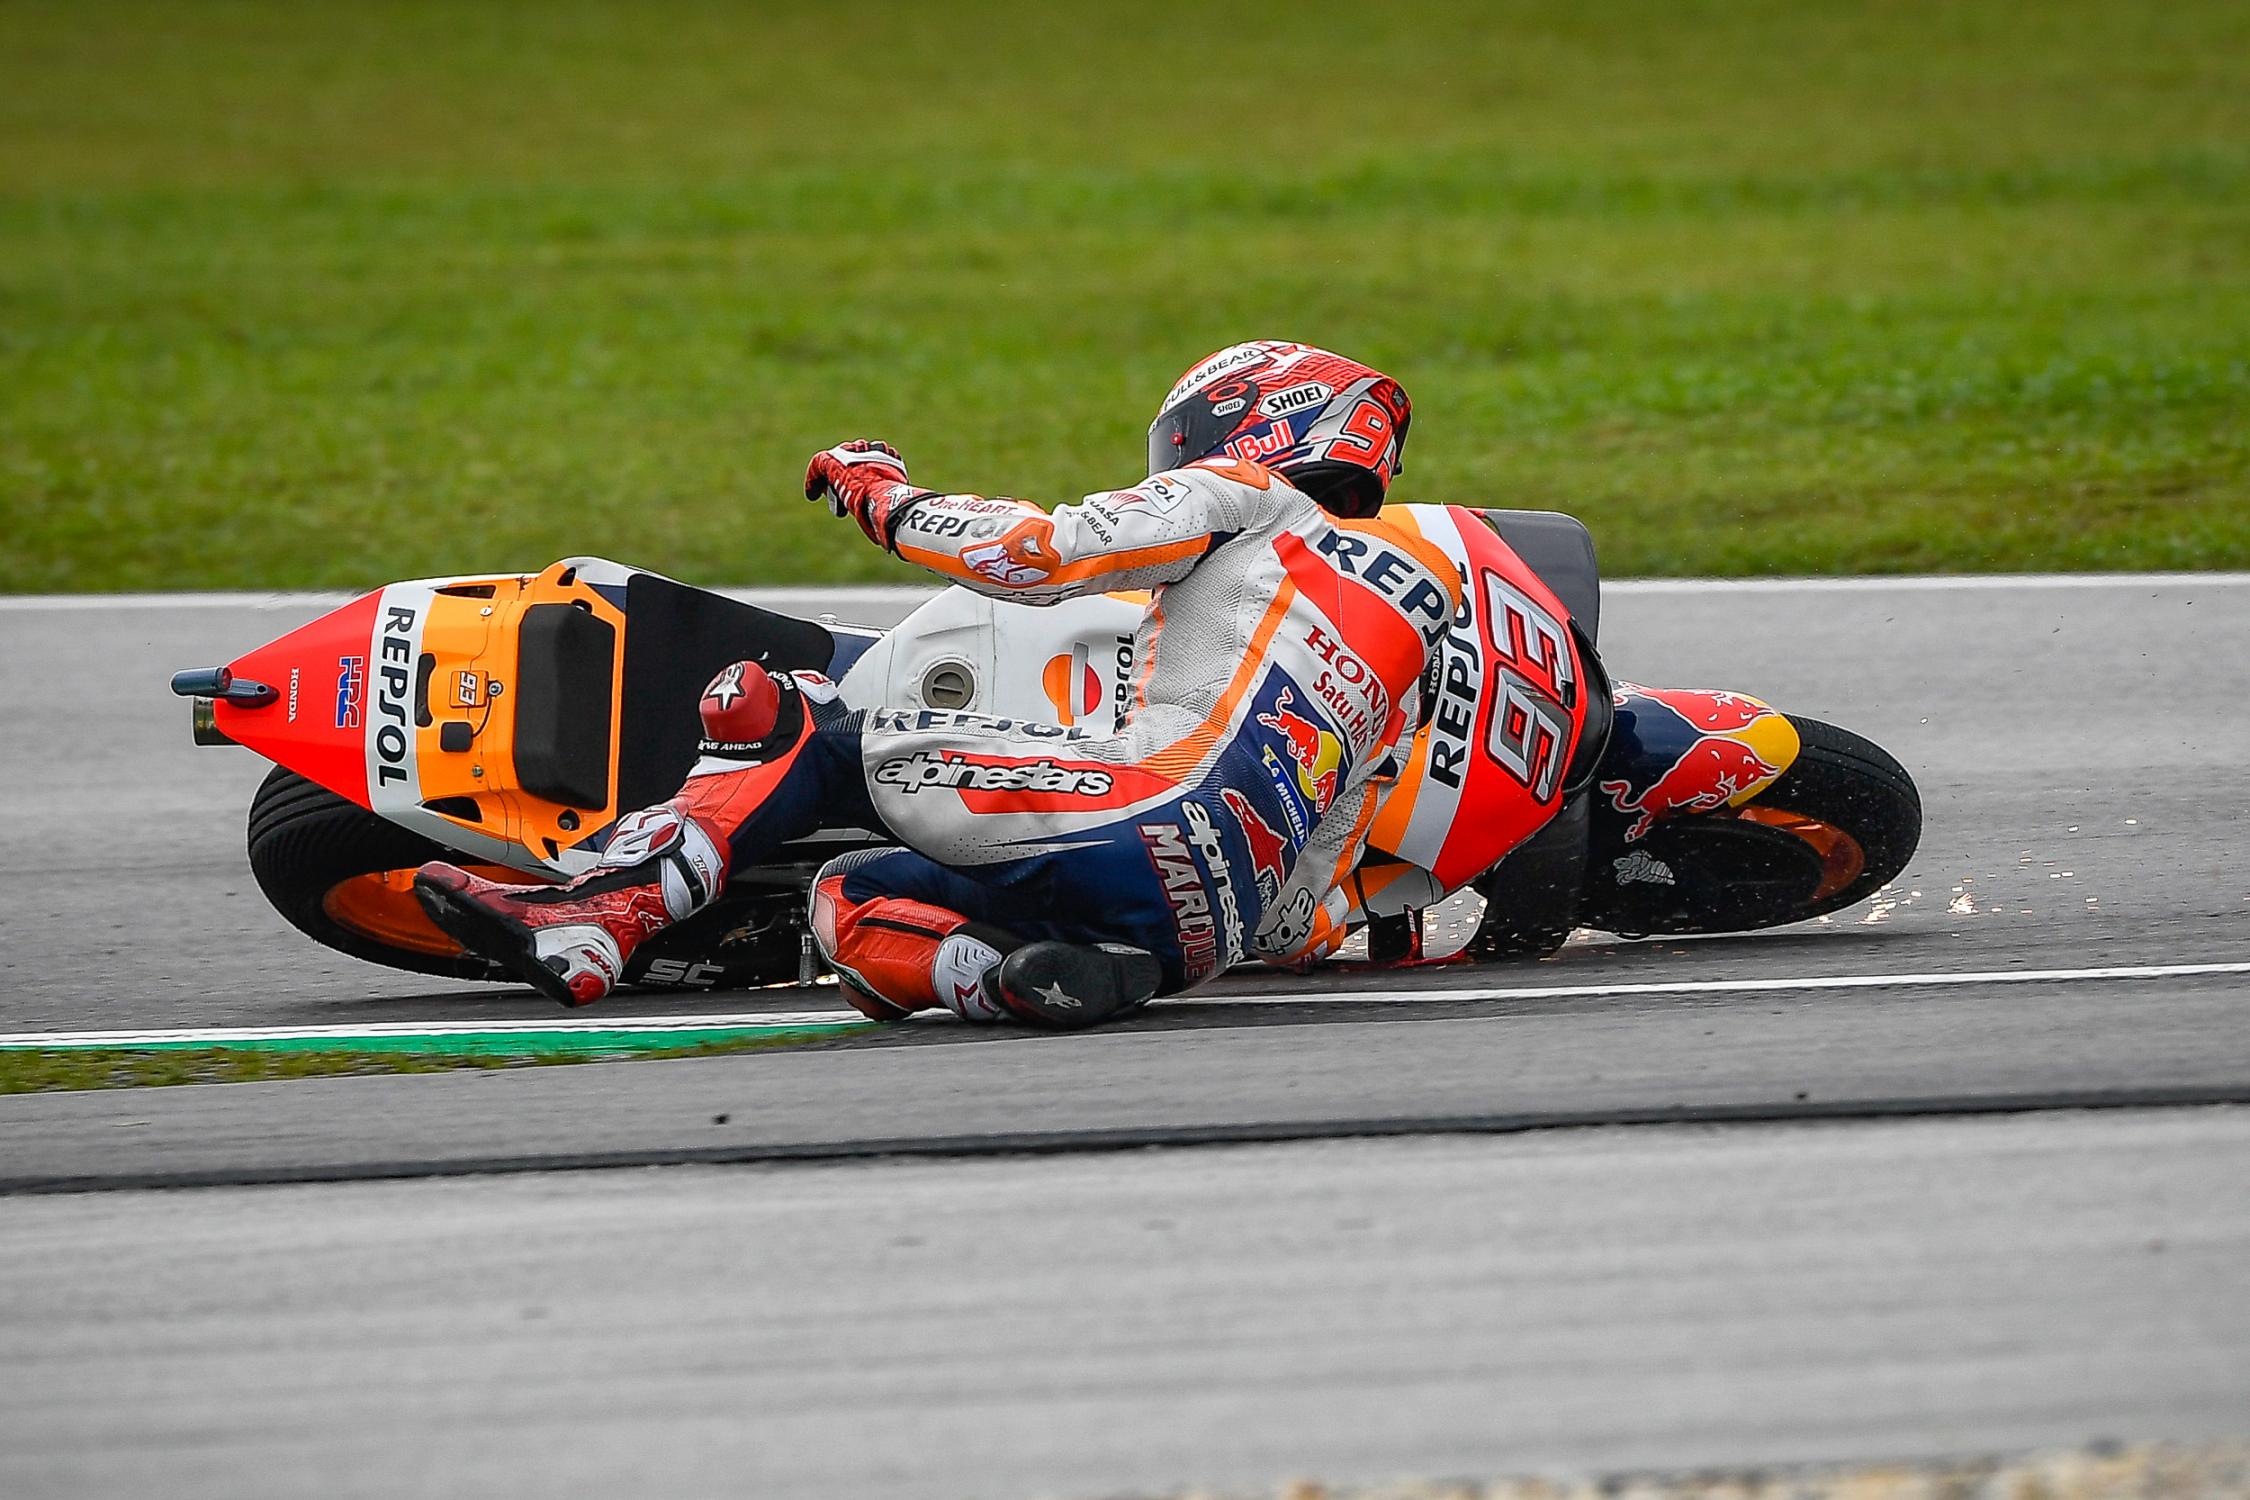 Despite falling Marquez still took pole only to have it taken away